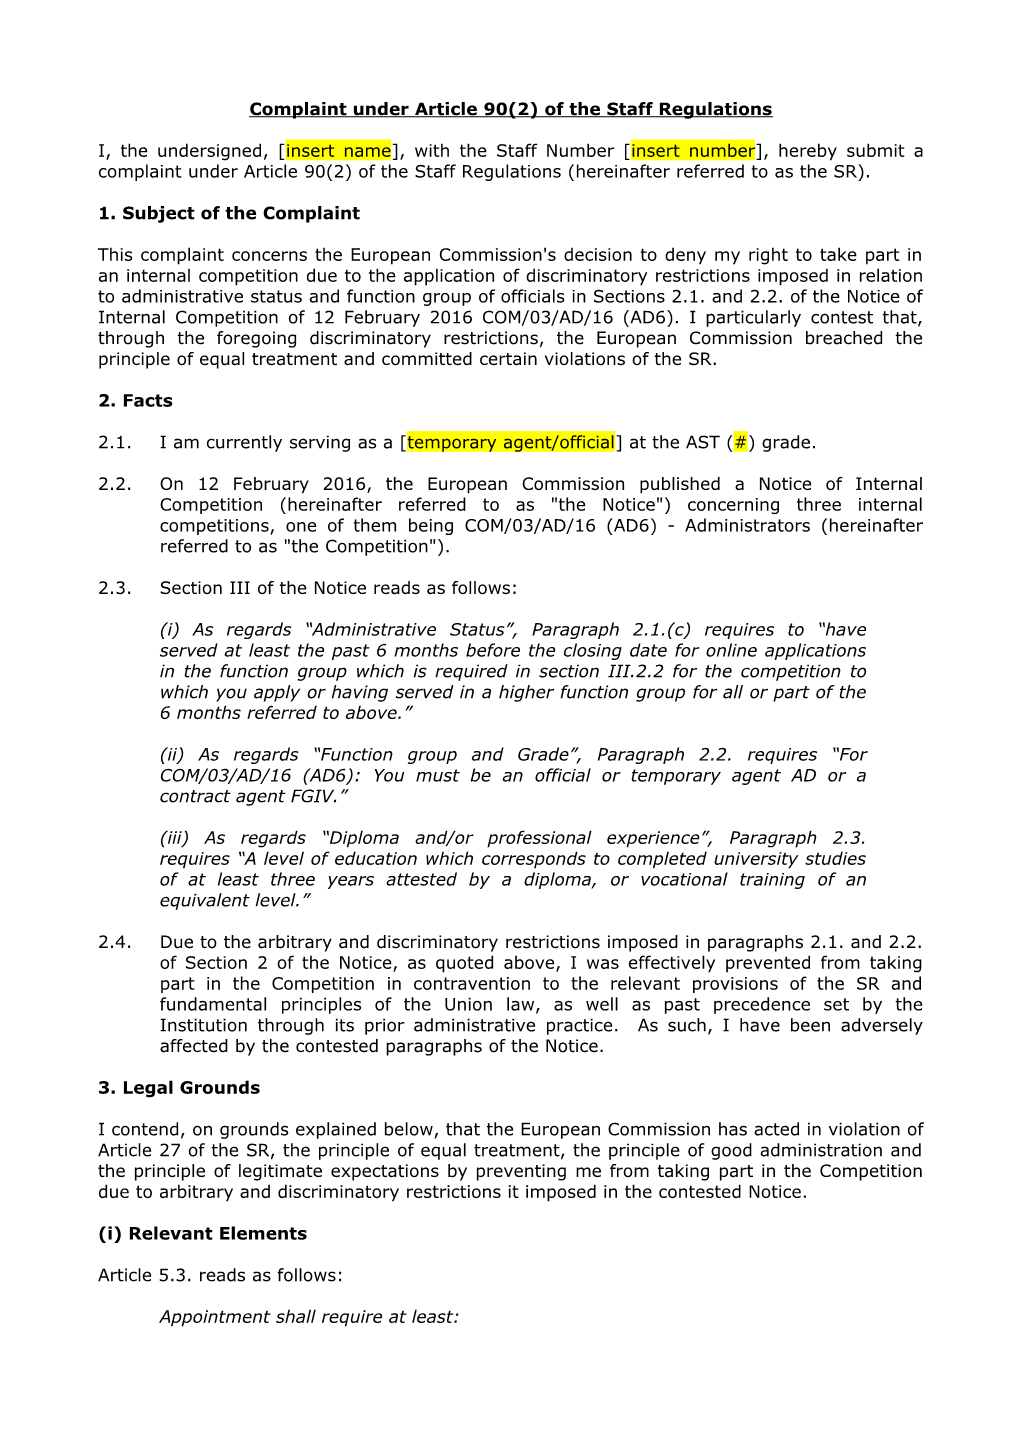 Complaint Under Article 90(2) of the Staff Regulations